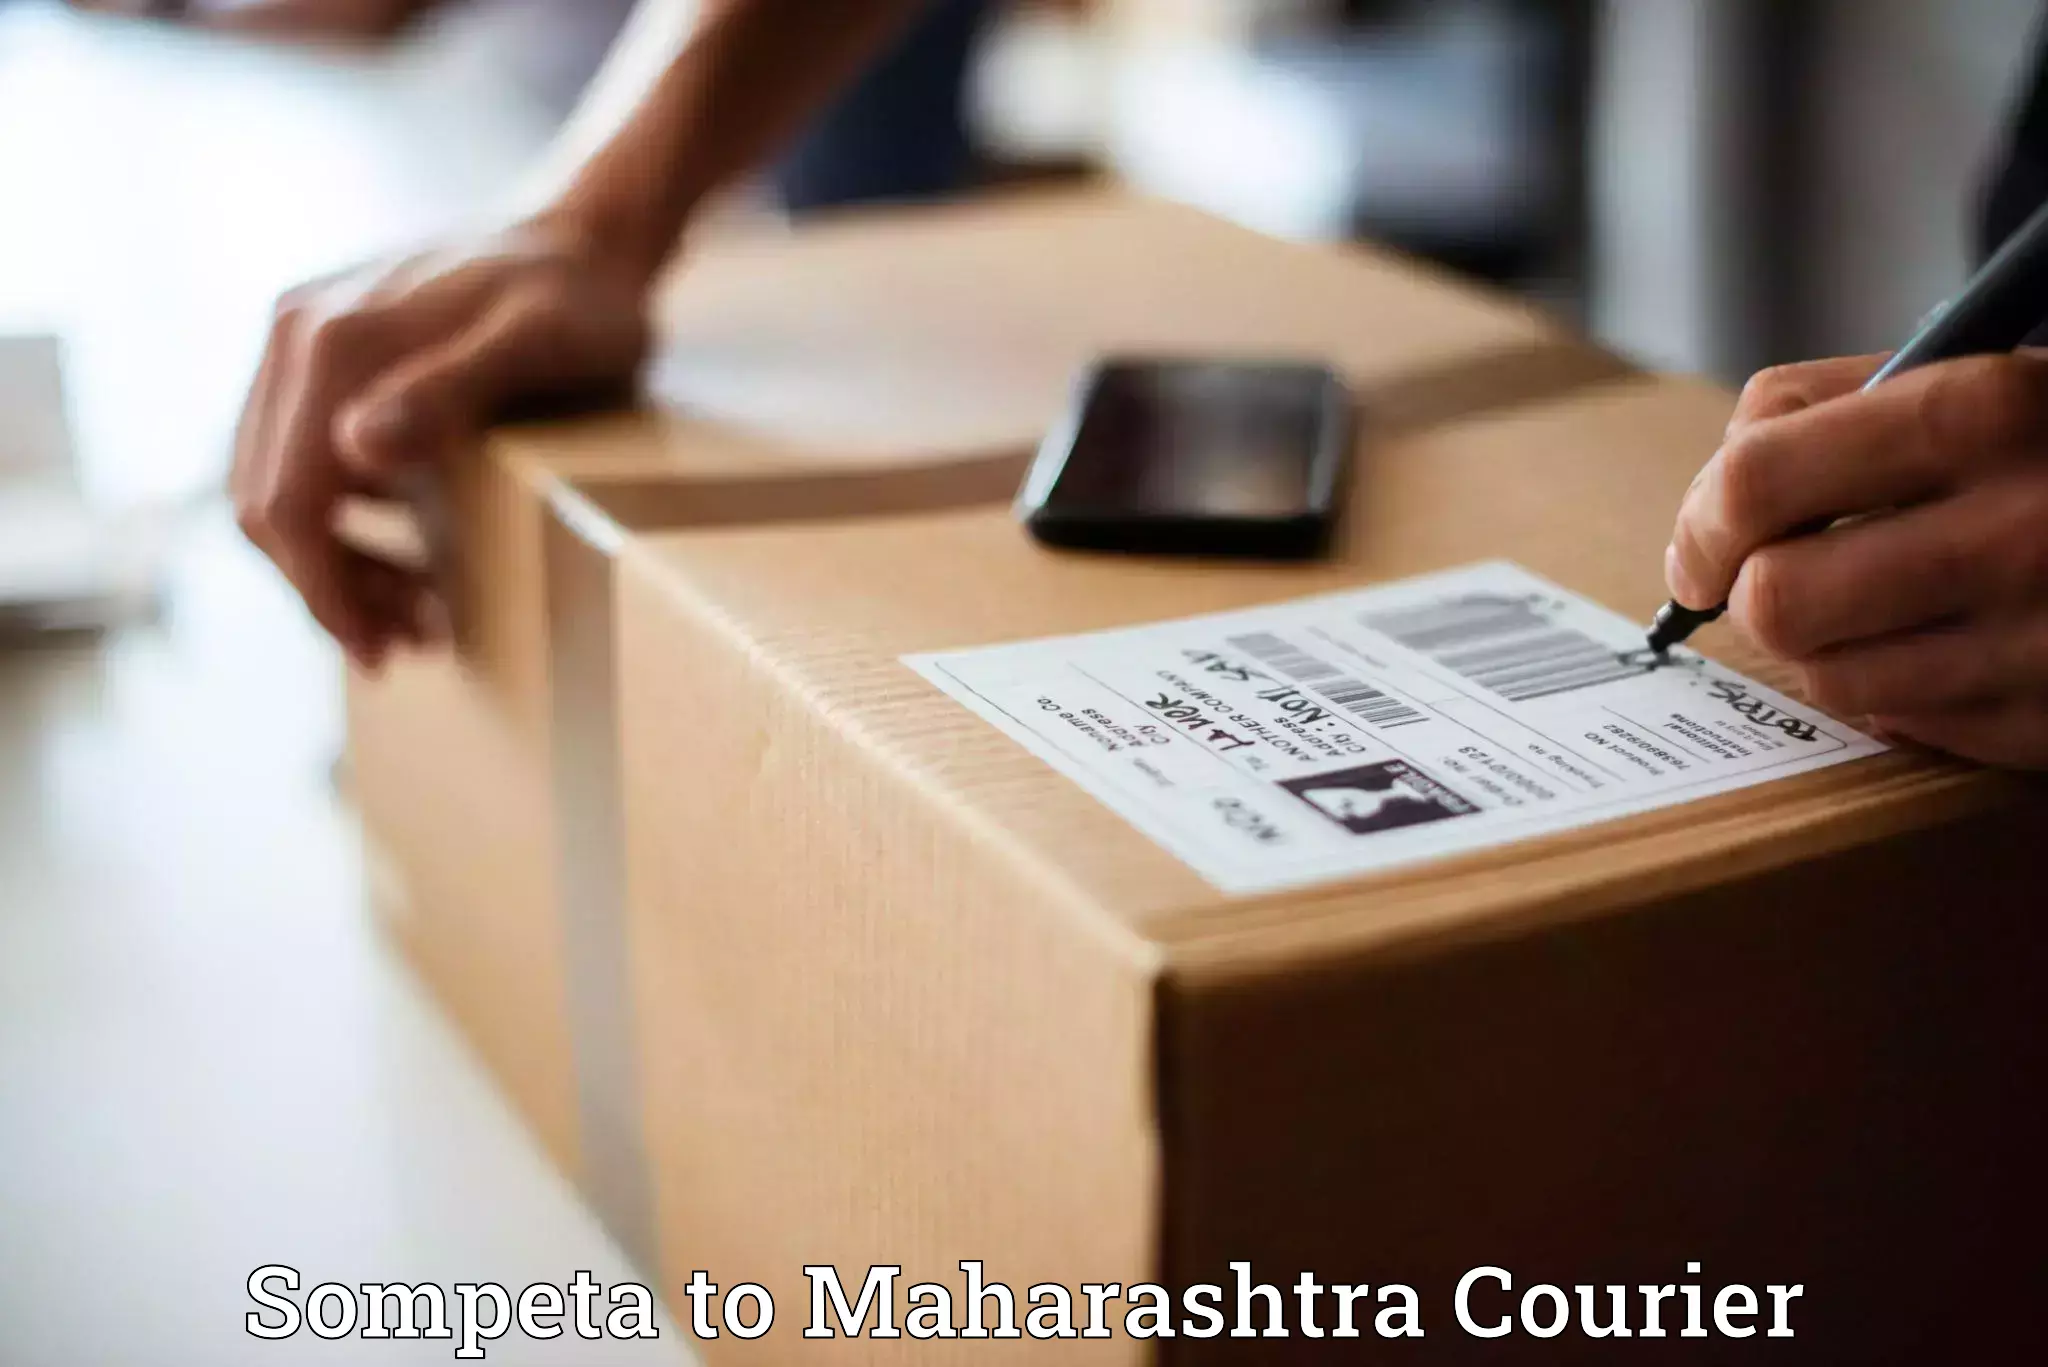 Professional courier services Sompeta to Mahabaleshwar